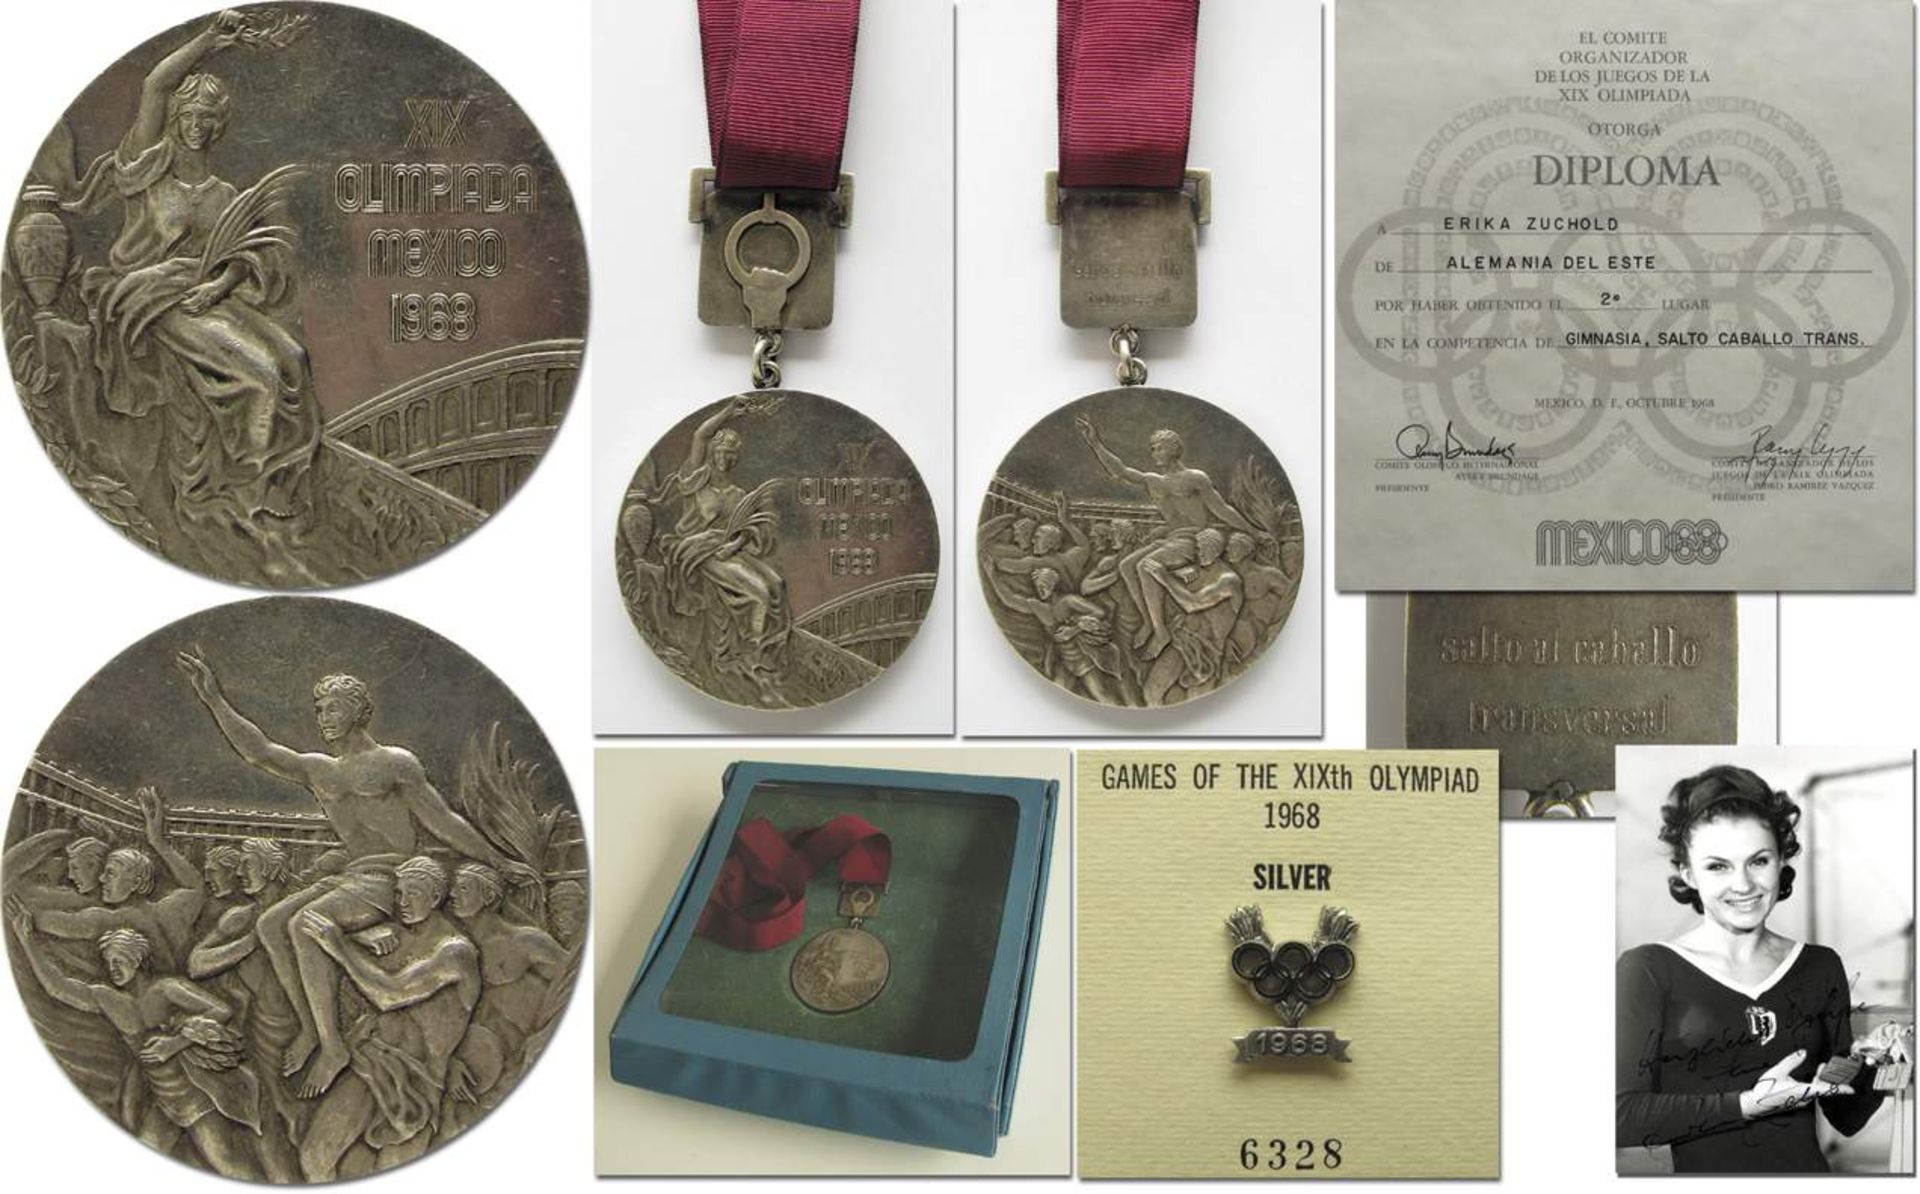 Olympic Games Mexico 1968 Silver Winner medal - Official silver medal for the second place in